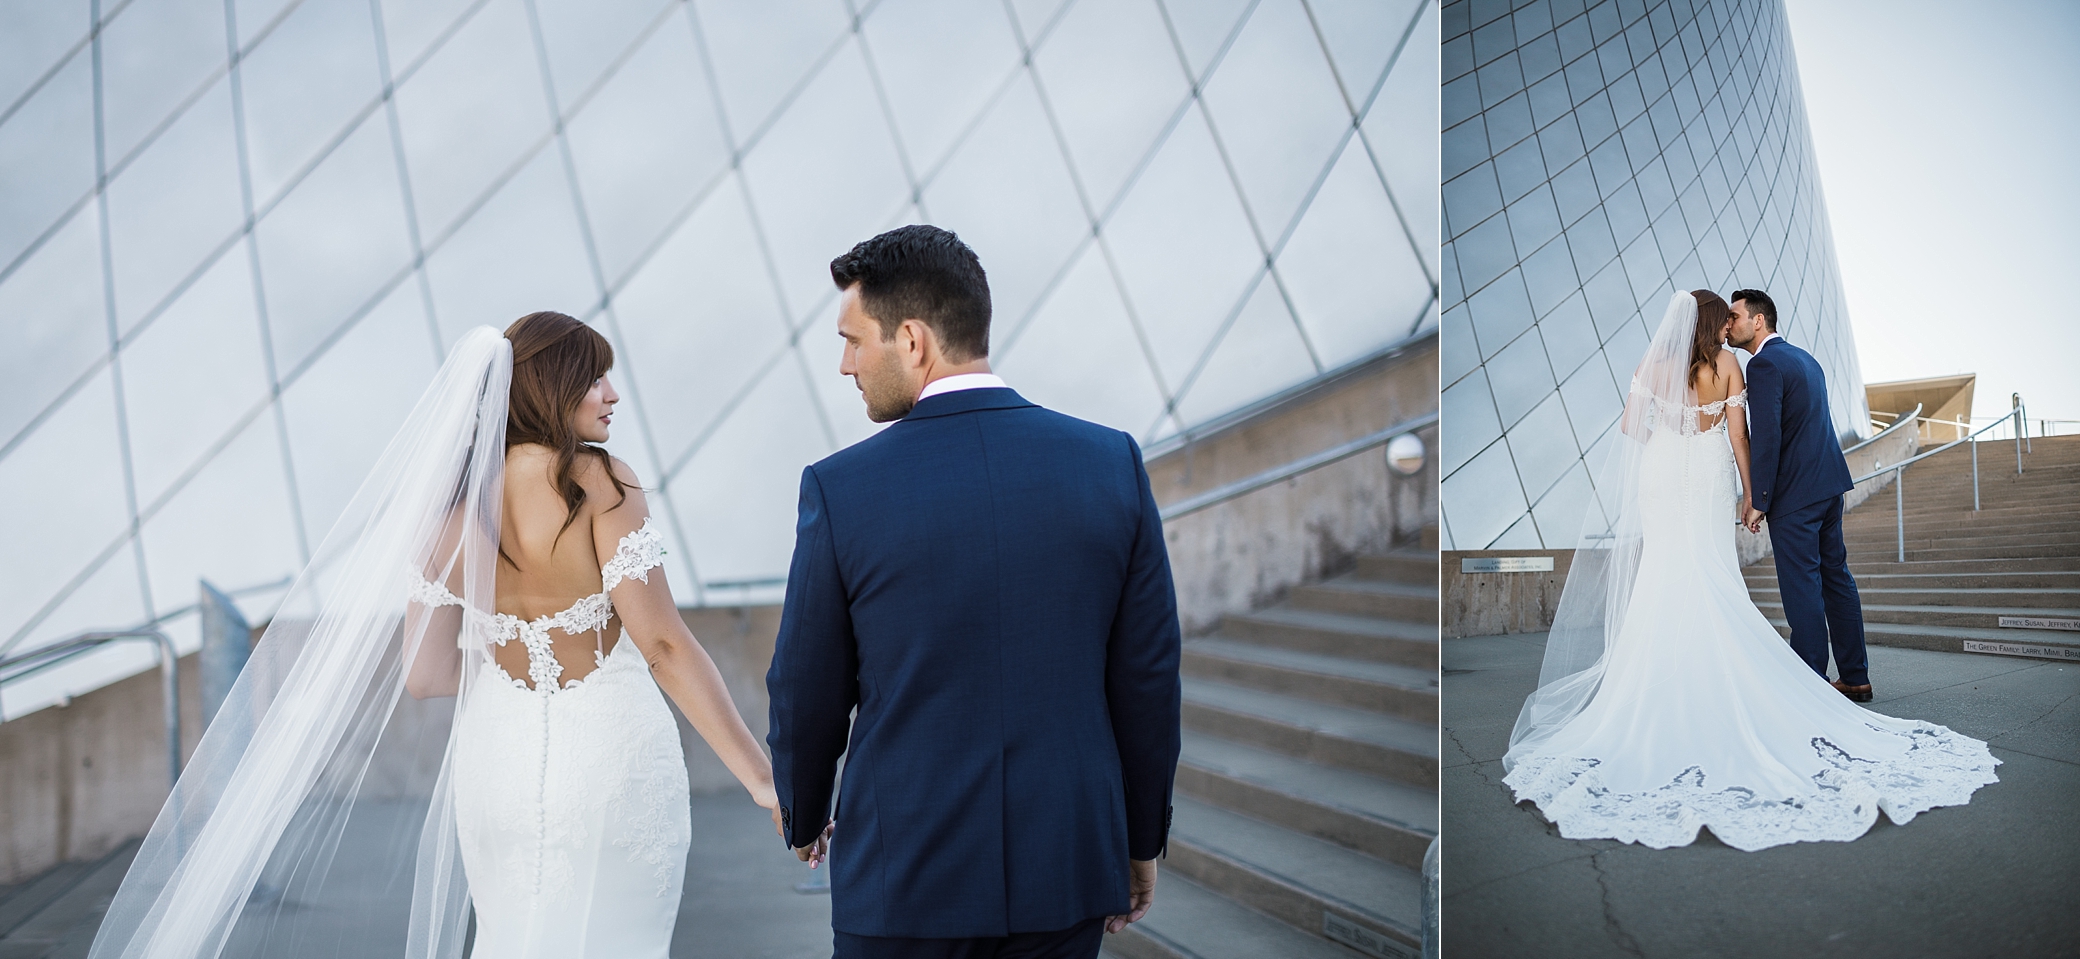 Bride and Groom wedding portraits at the Museum of Glass in Tacoma. Photographed by Tacoma Wedding Photographer, Megan Montalvo Photography